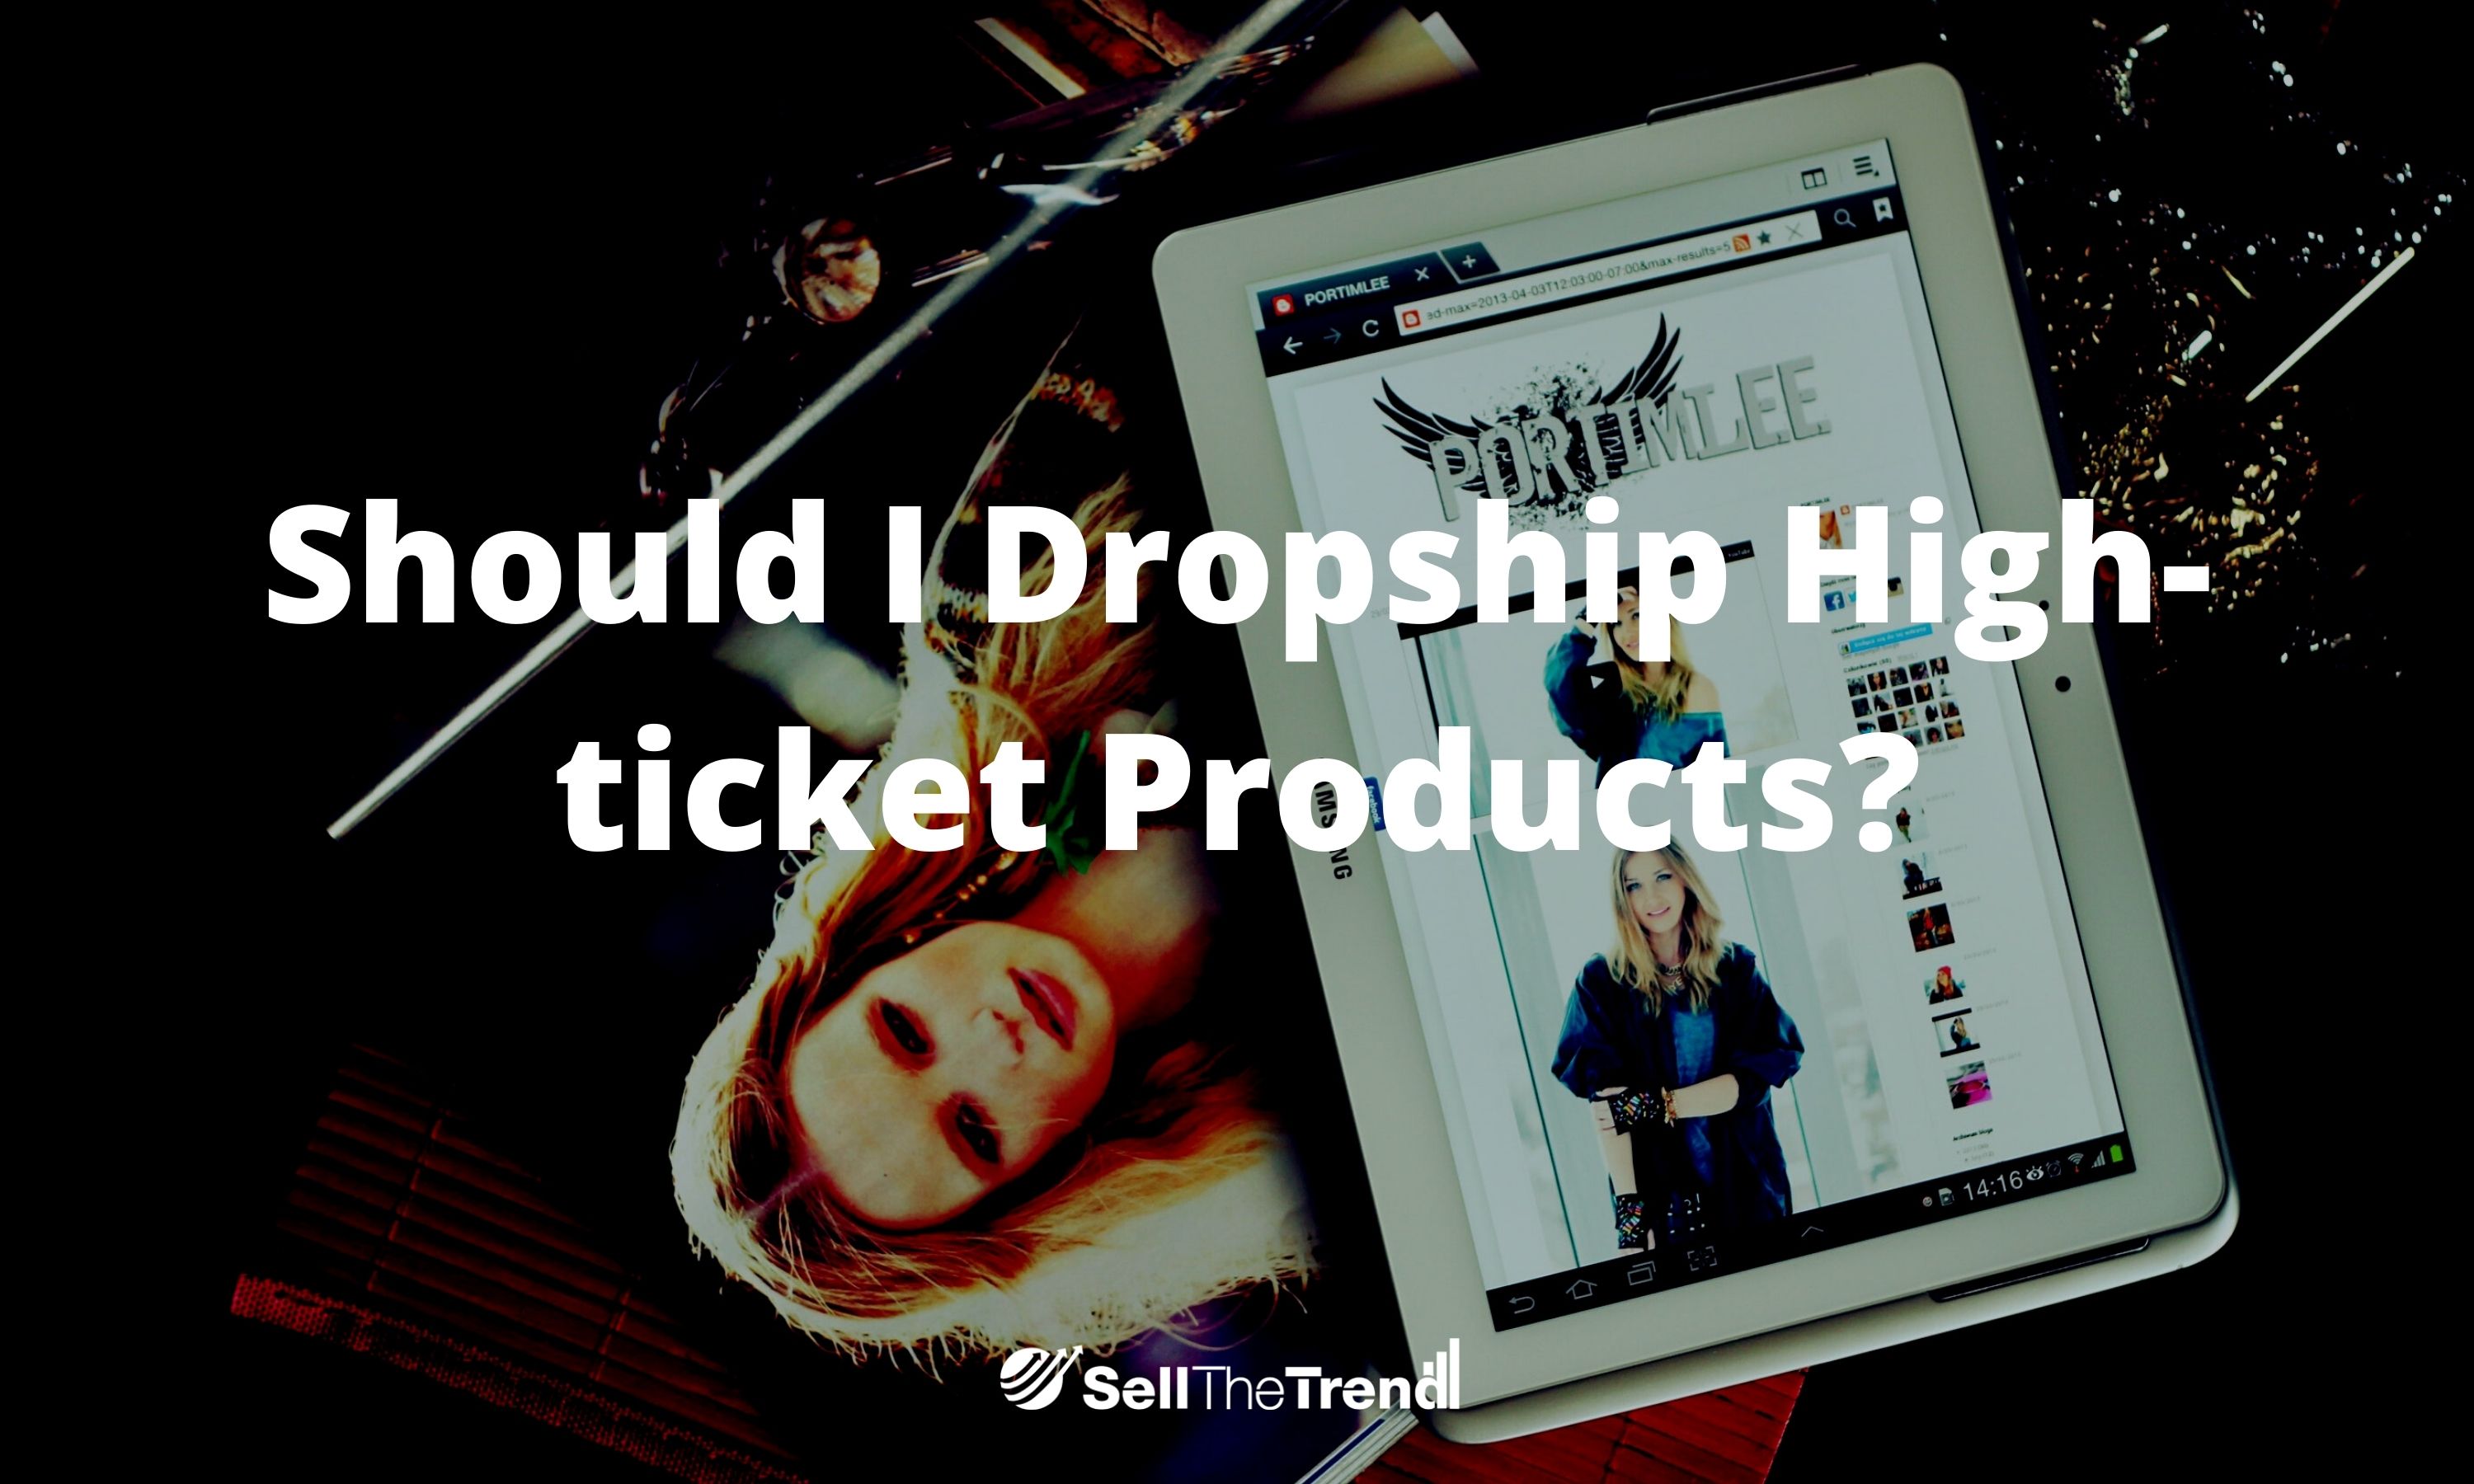 Should I Dropship High-ticket Products?